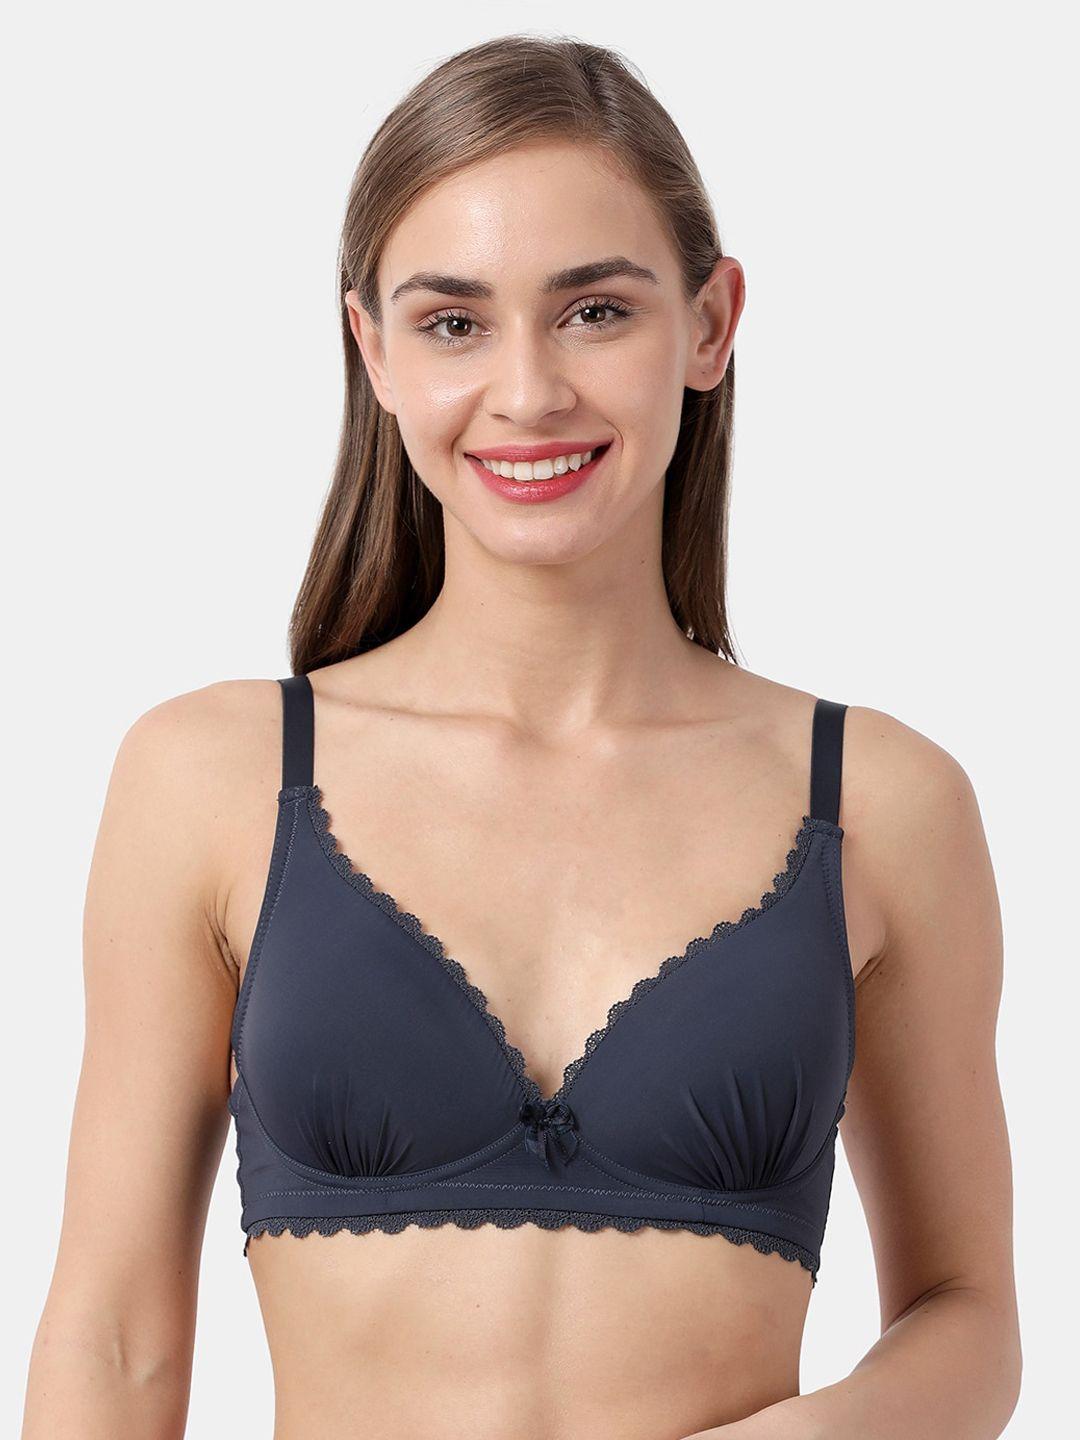 shyaway Navy Blue Solid Non-Wired Lightly Padded Plunge Bra